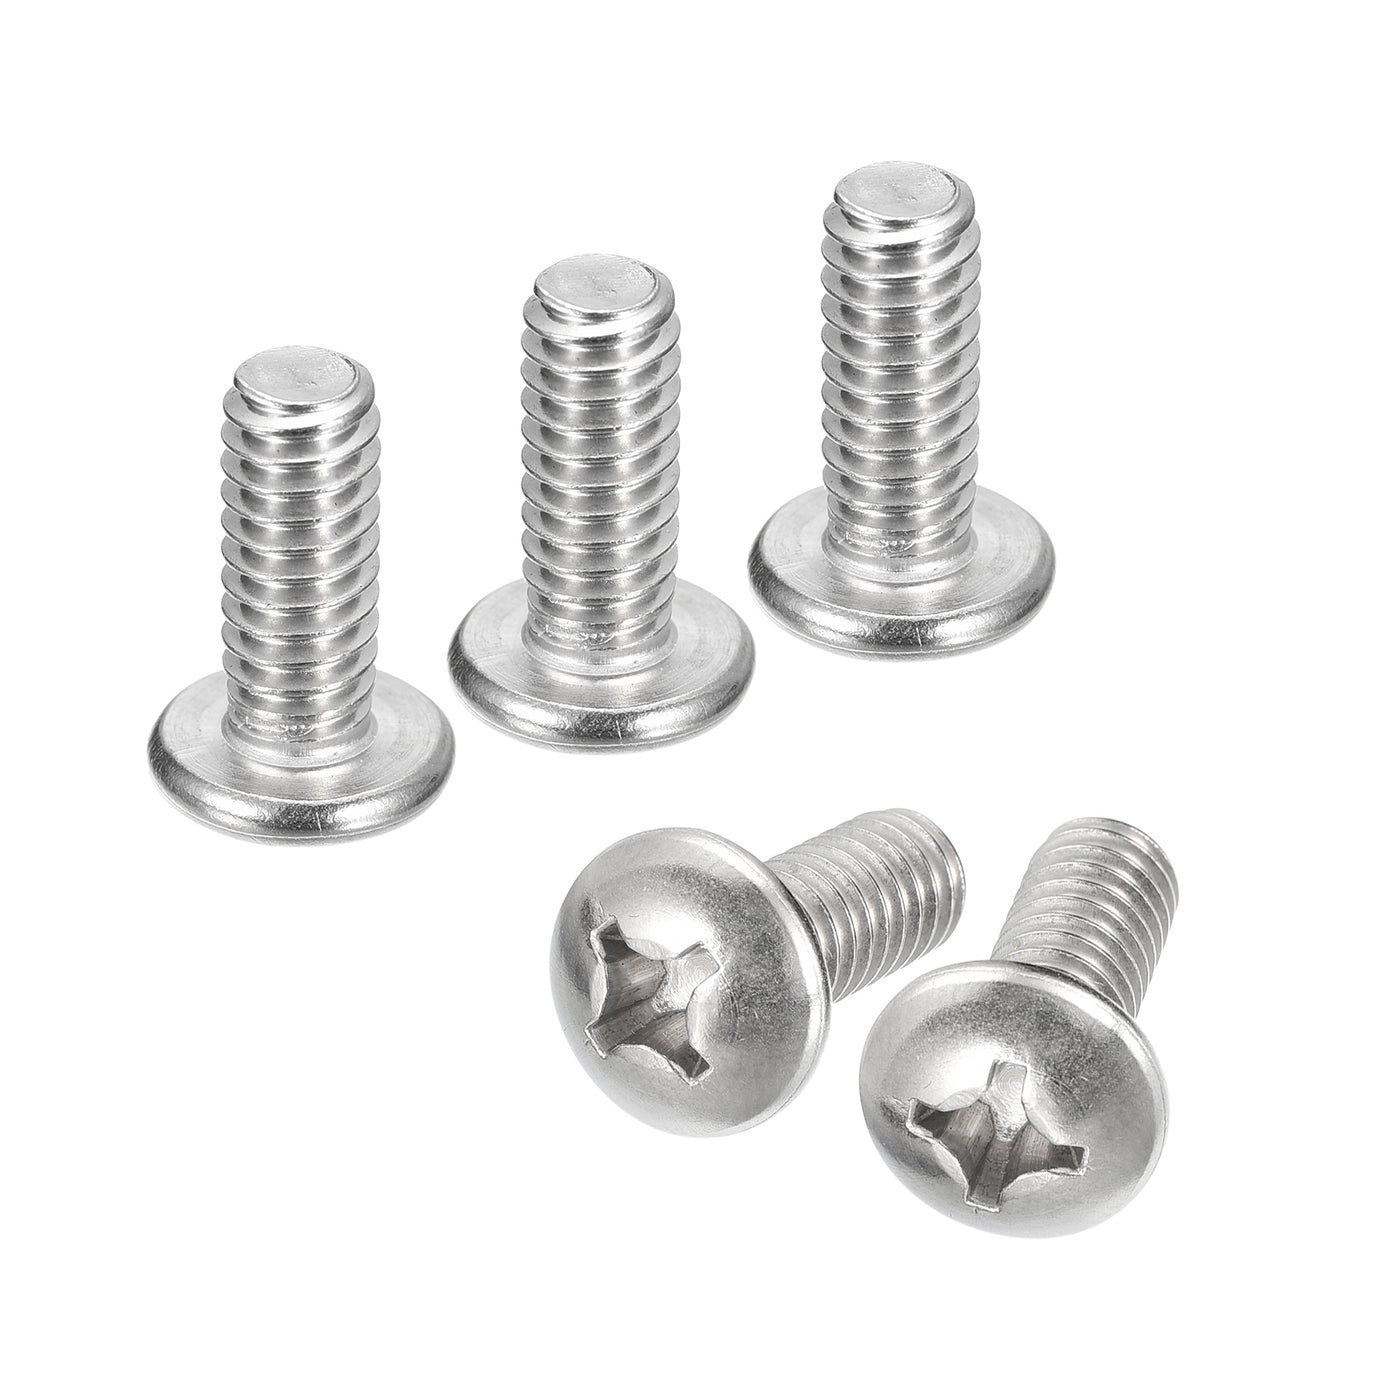 uxcell Uxcell 1/4-20x5/8" Pan Head Machine Screws, Stainless Steel 18-8 Screw, Pack of 20